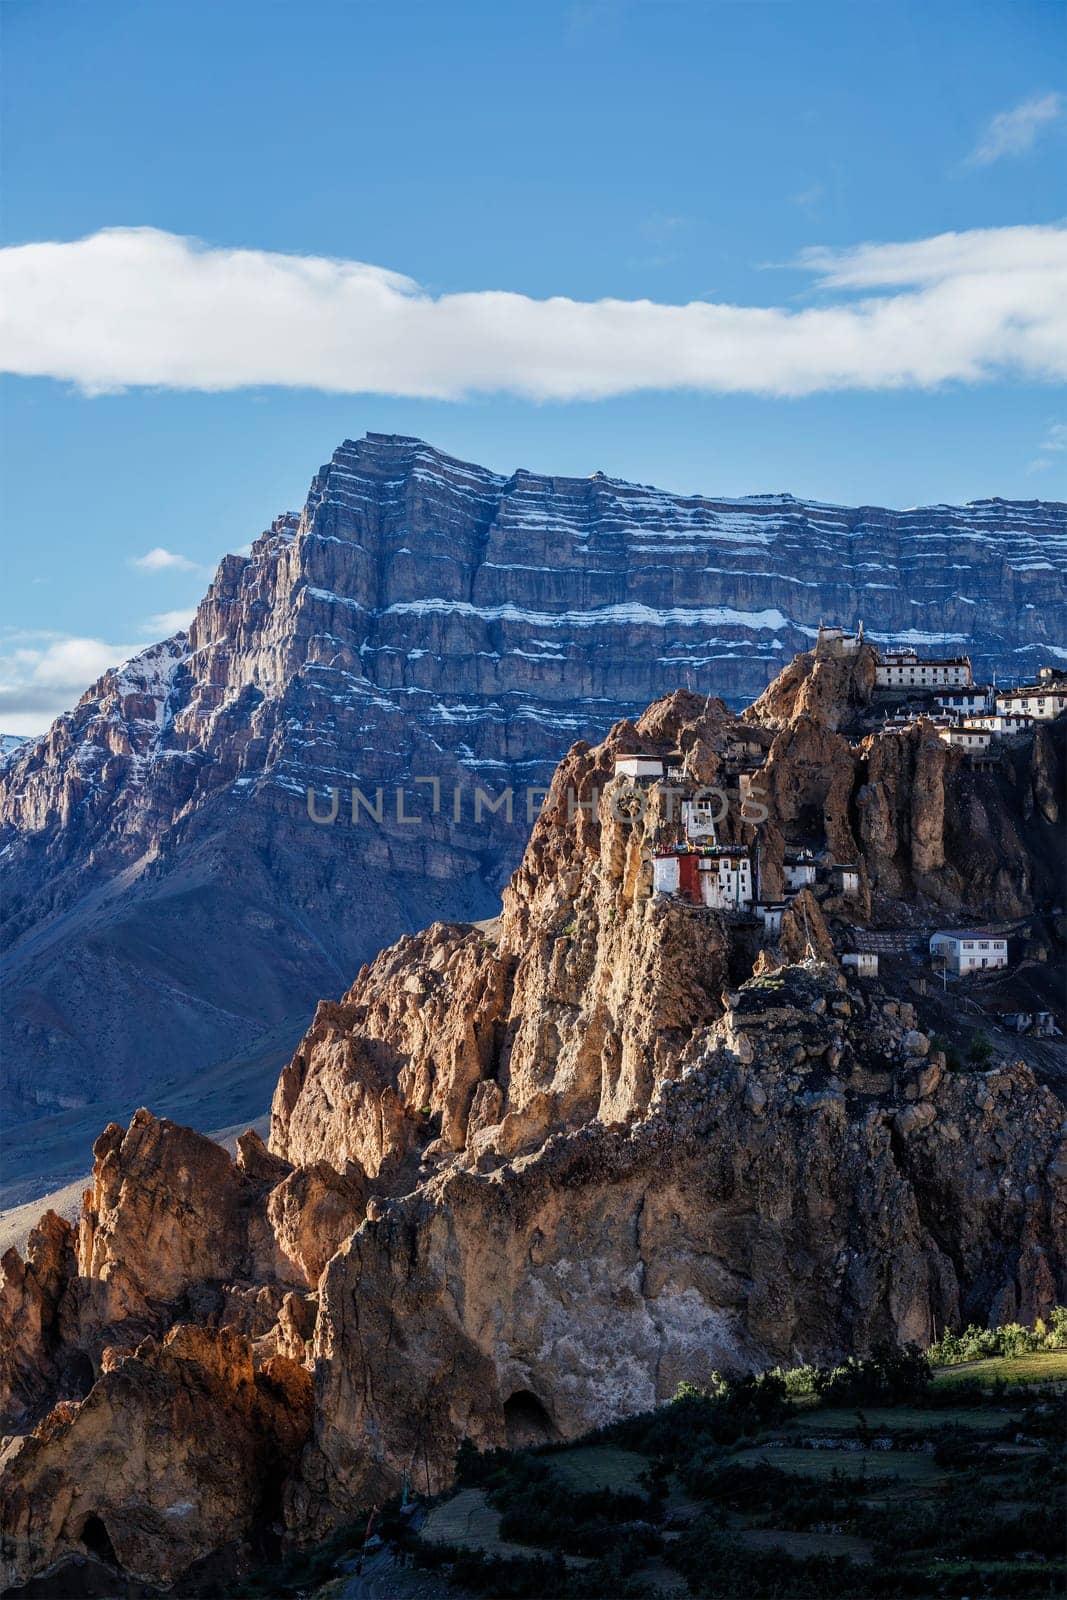 Dhankar monastry perched on a cliff in Himalayas, India by dimol